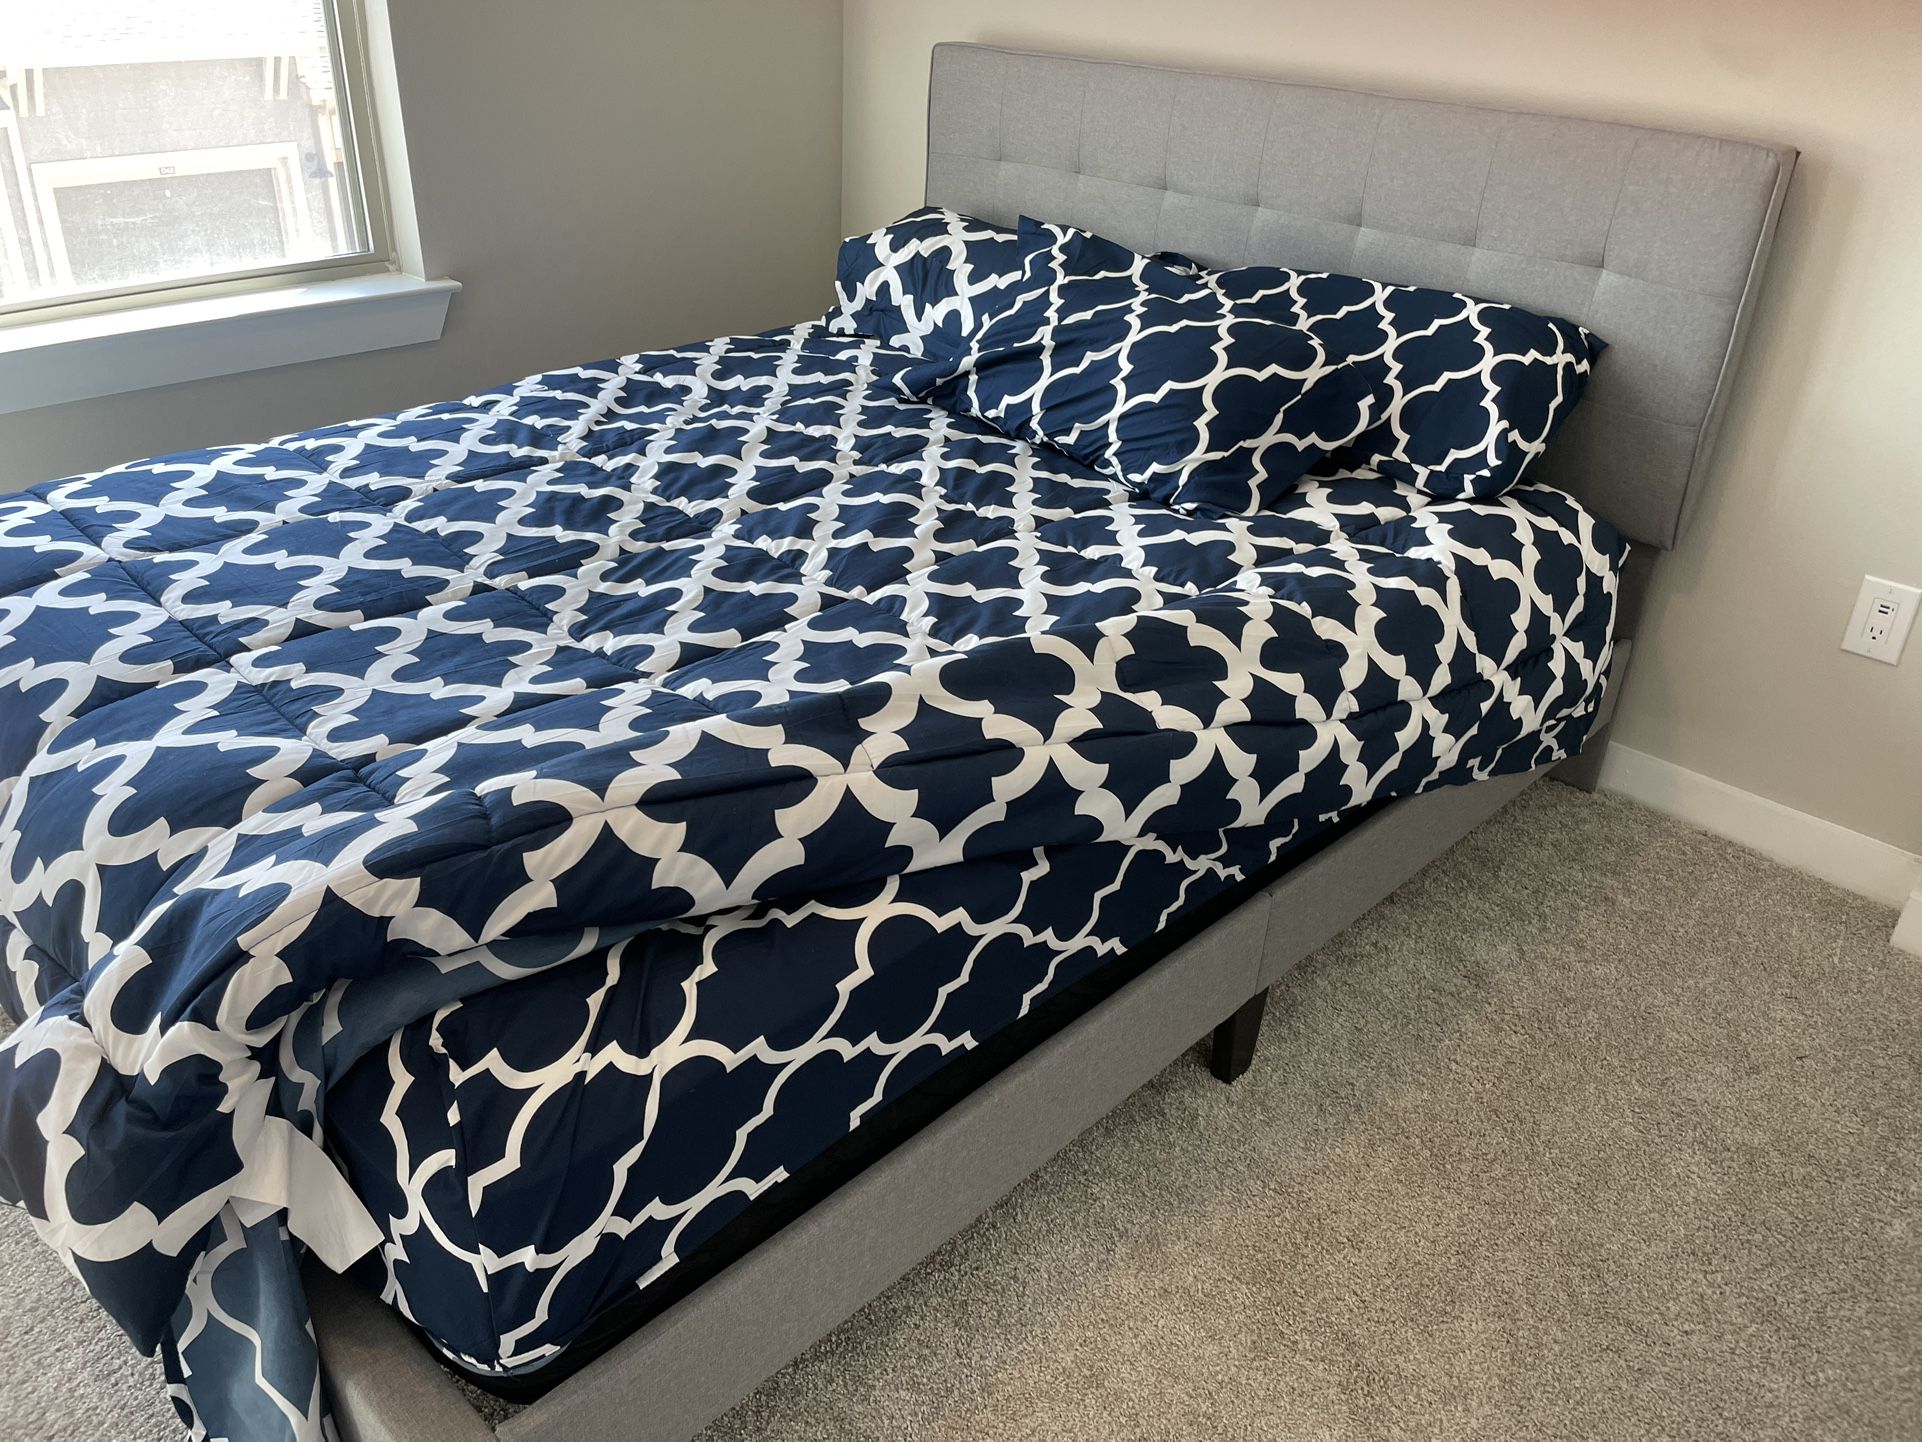 Queen Bed & Frame Barely Used $REDUCED